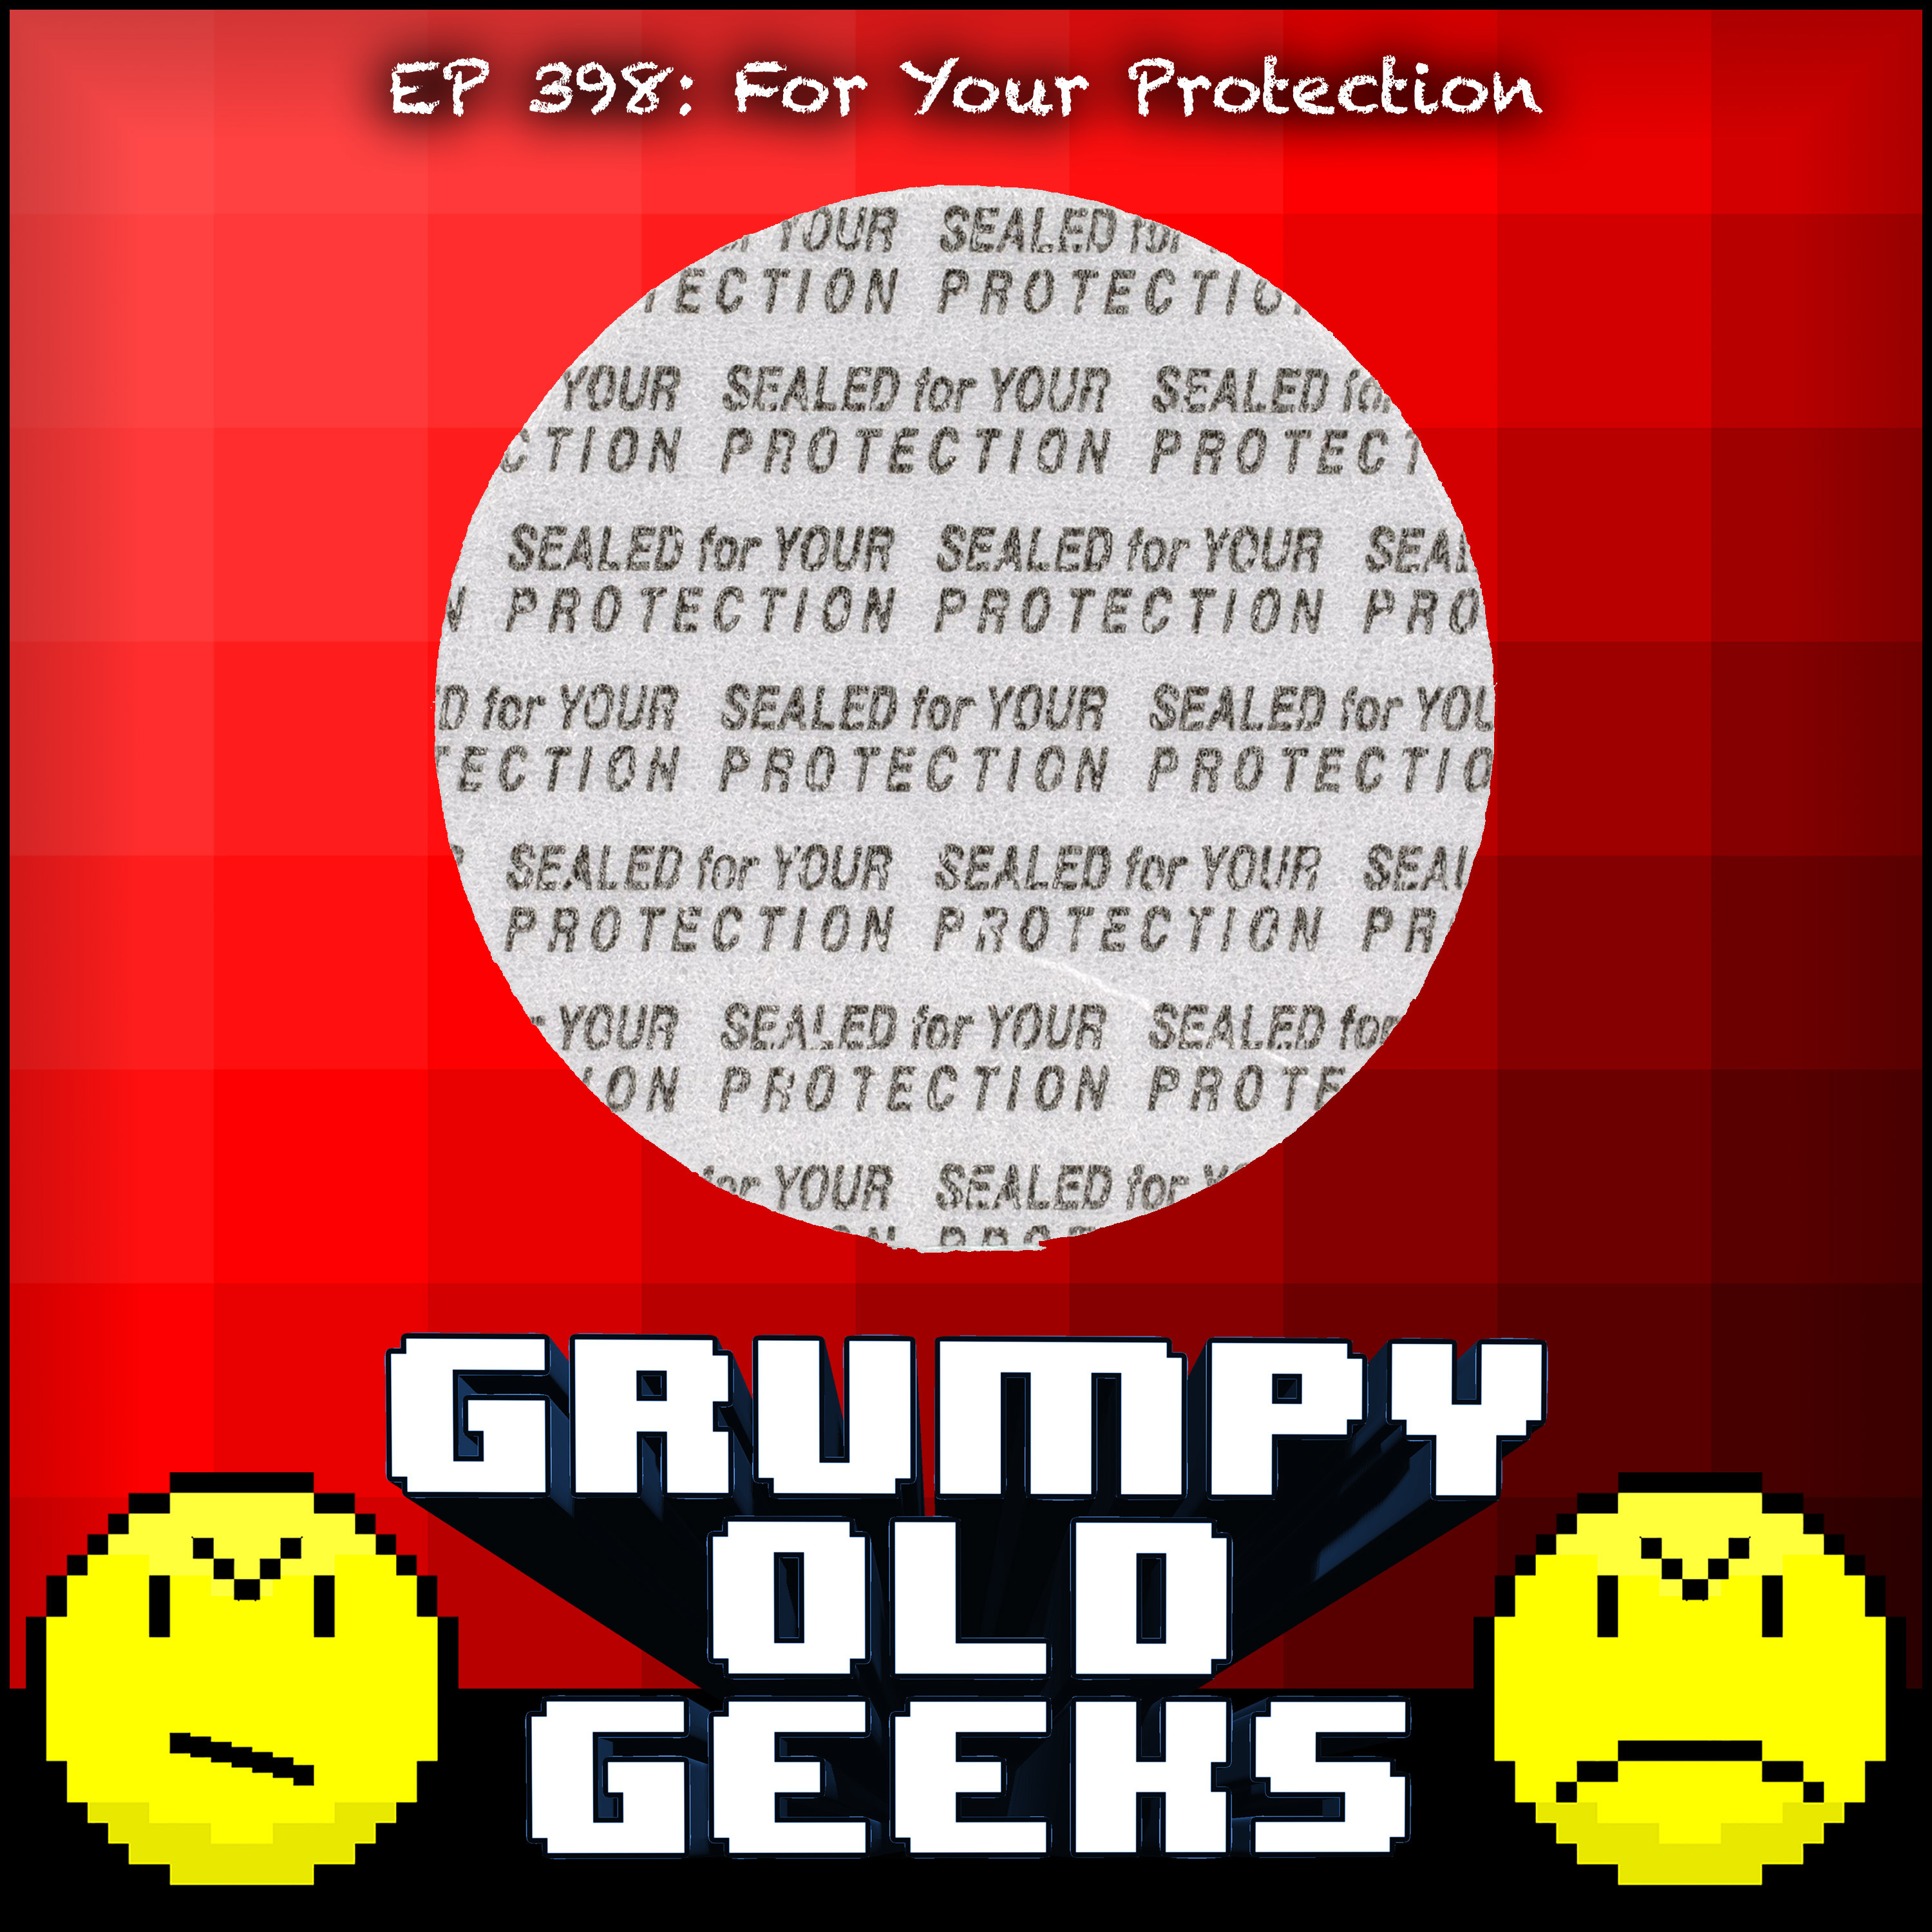 398: For Your Protection Image